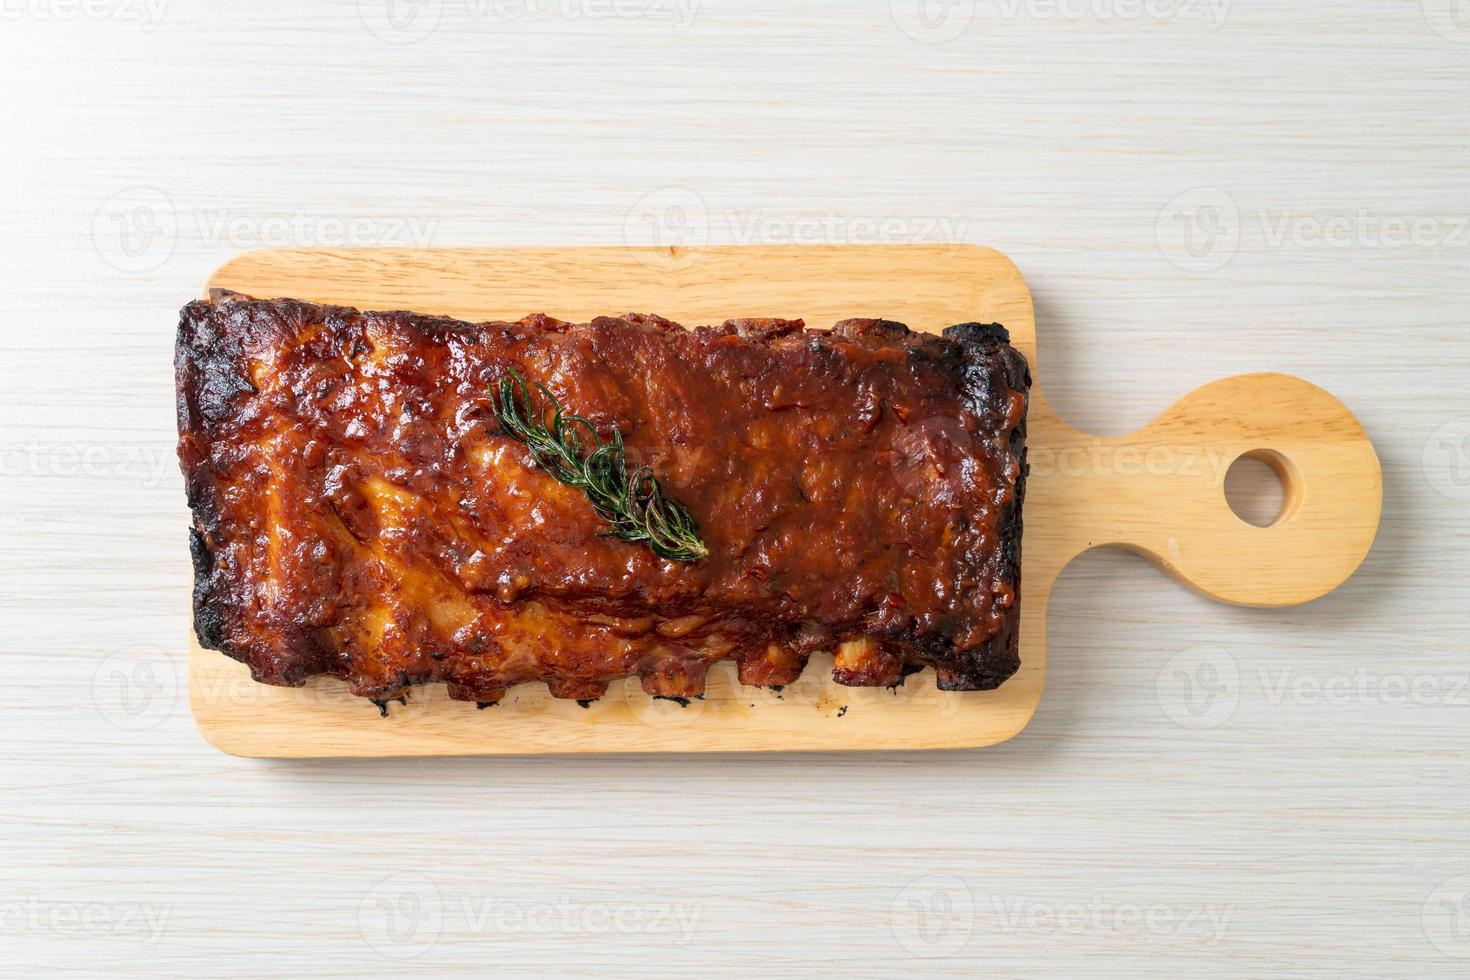 grilled and barbecue ribs pork photo